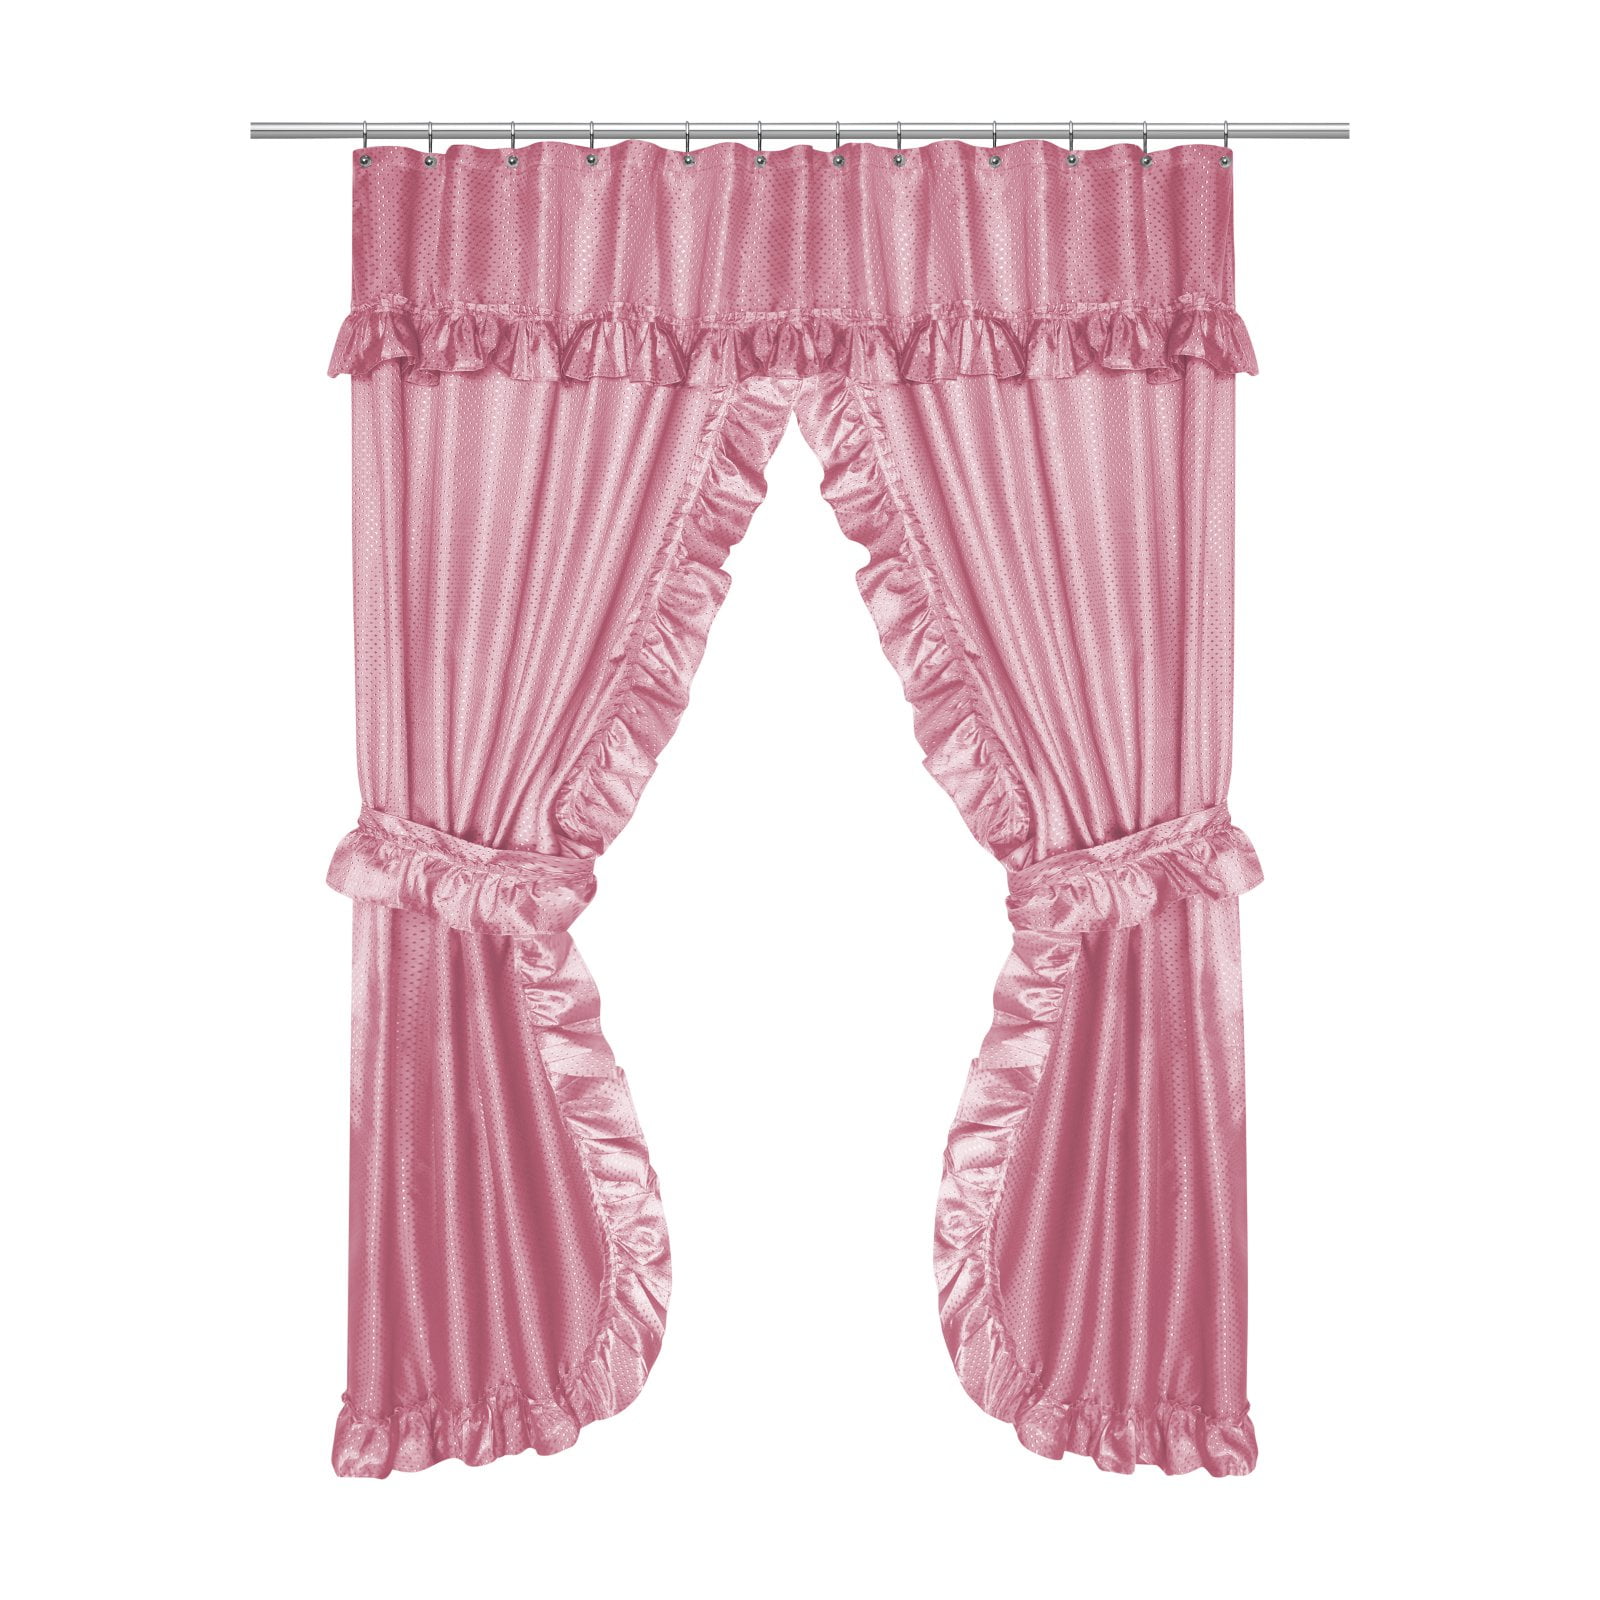 Details about   Pink Ruffled Double Swag Shower Curtain & Liner 70" x 72" w/12 Roller Rings 